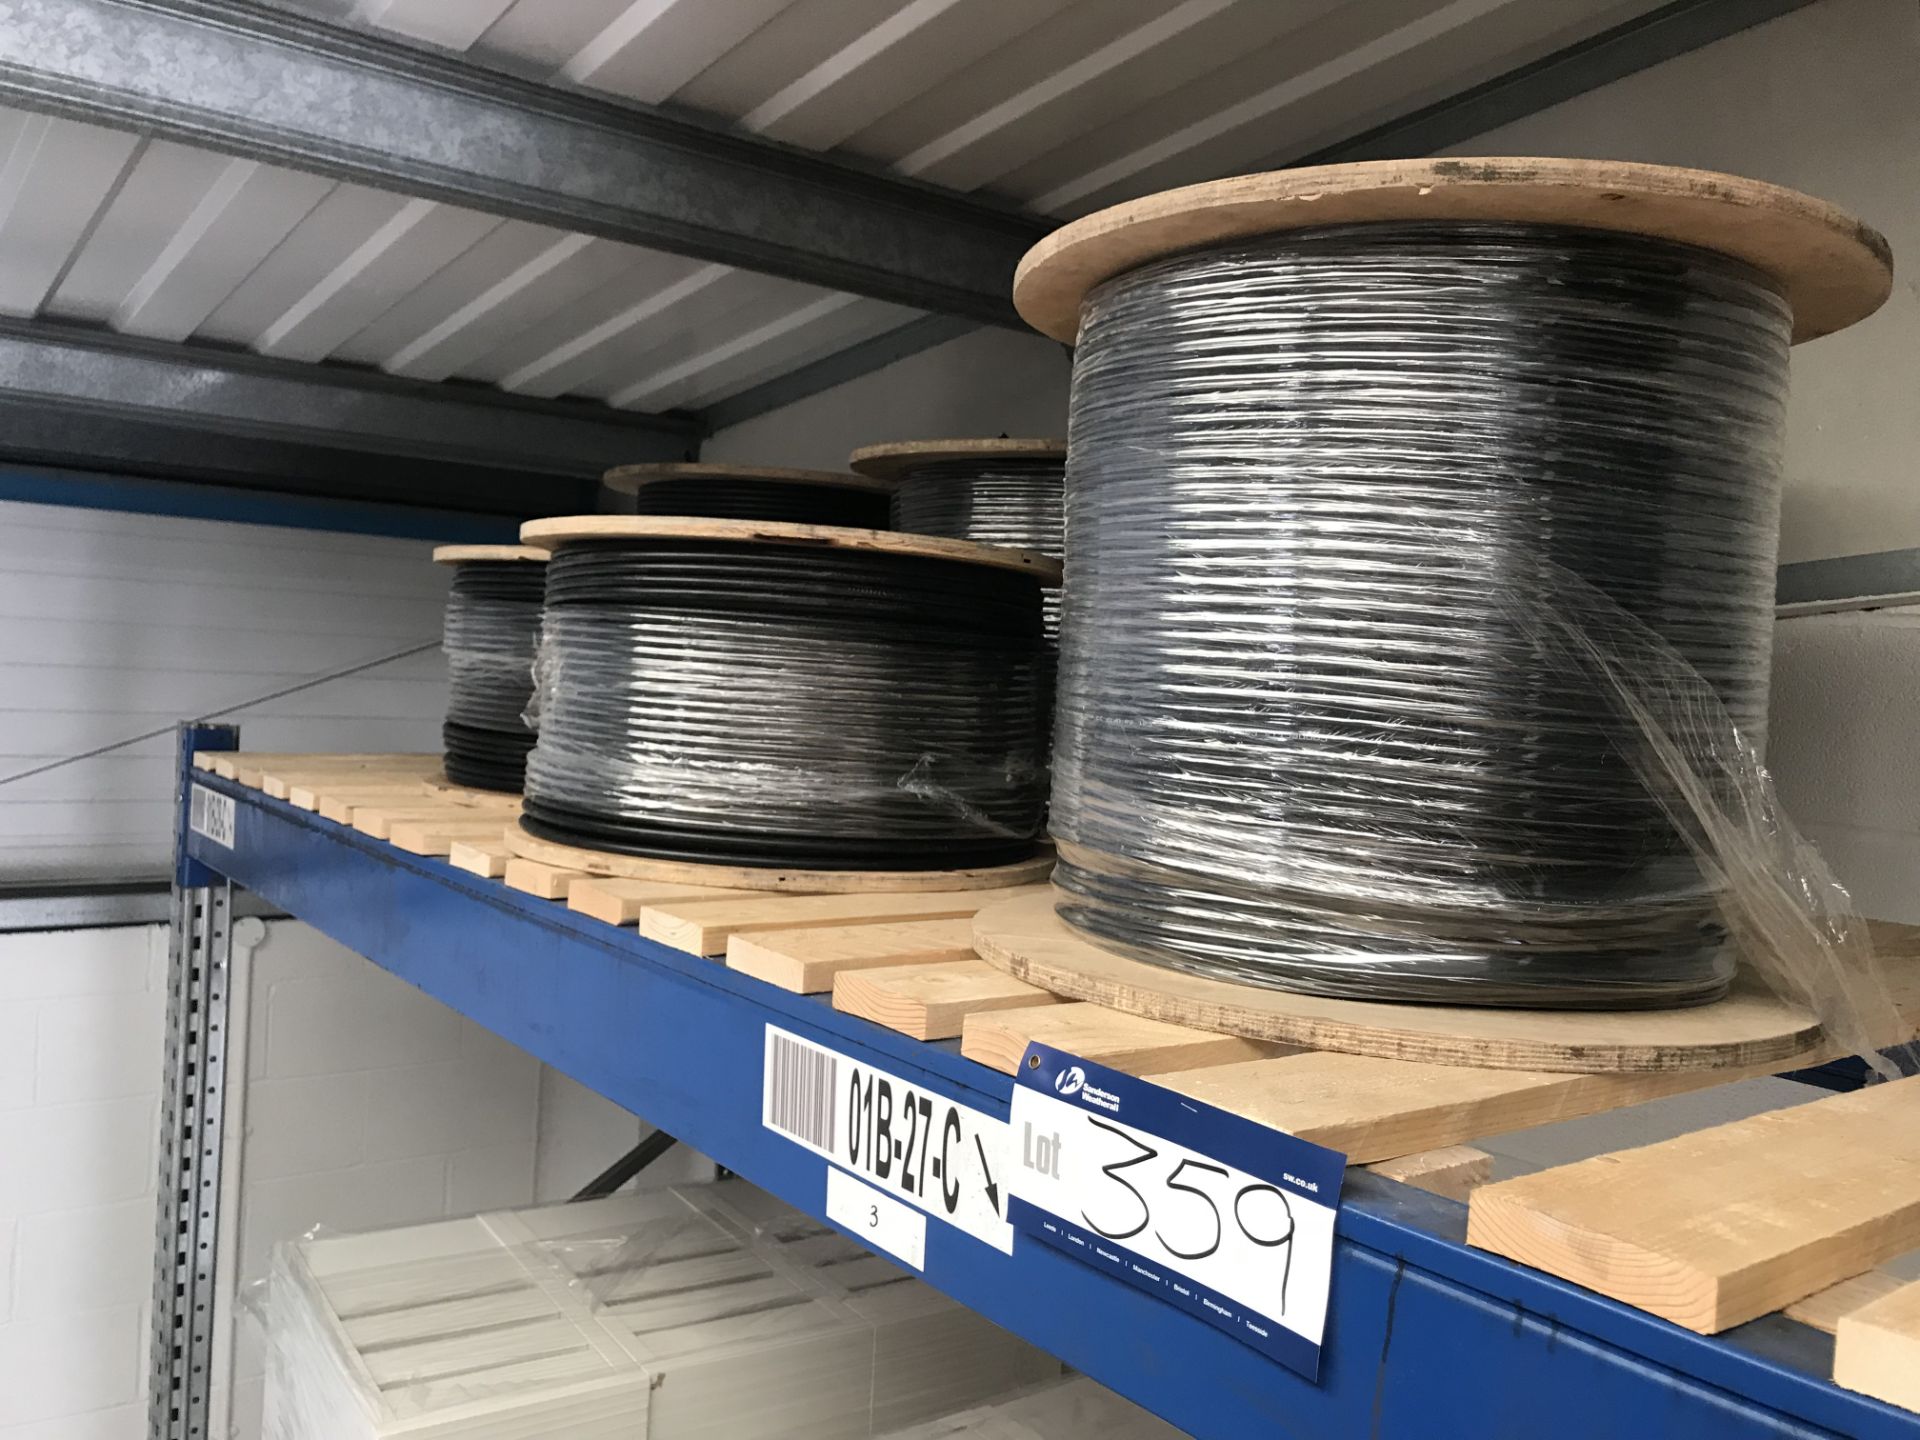 6 x Drums of Electrical Cable